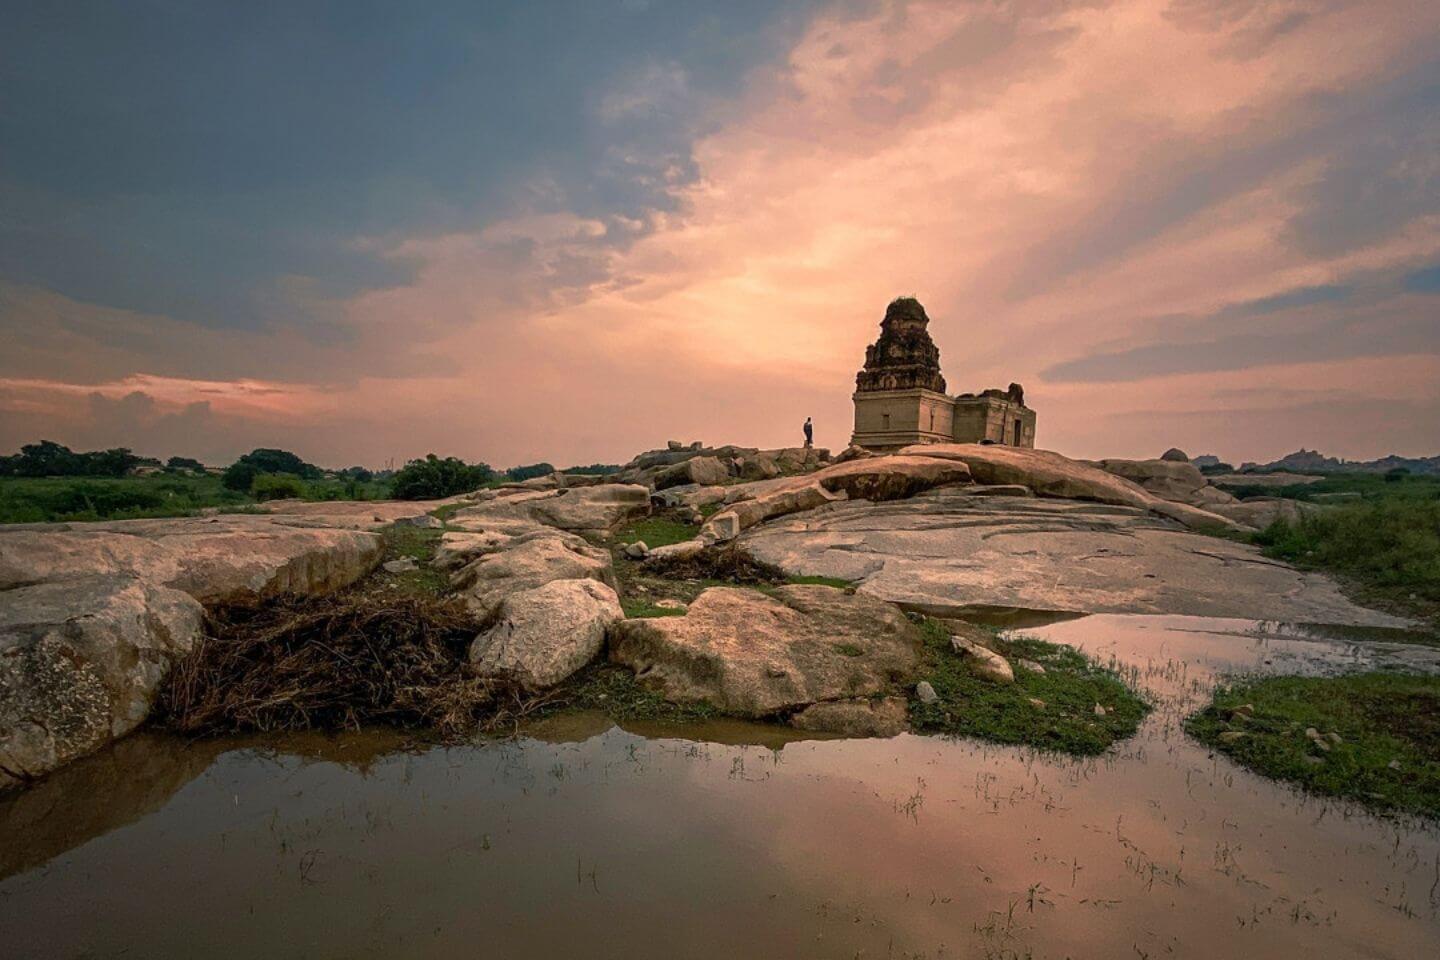 Hampi Most famous Heritage places to visit near Hyderabad with family and friends under 400 km